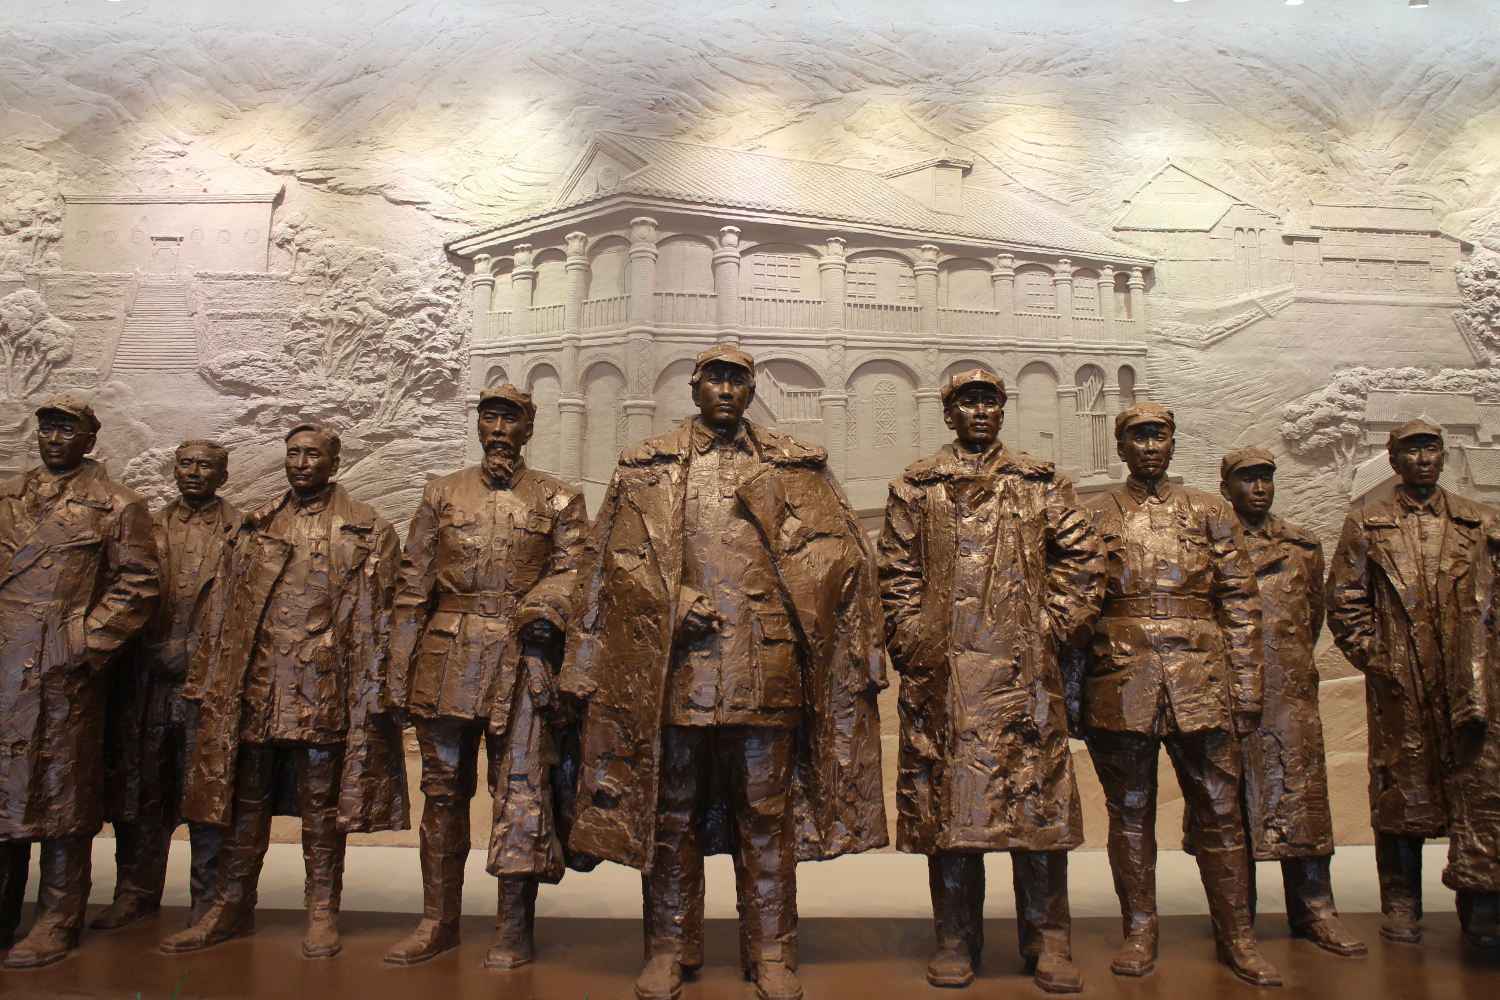 Mao Zedong and fellow revolutionaries depicted at the Zunyi Meeting Museum. Image by Thomas Bird / Lonely Planet